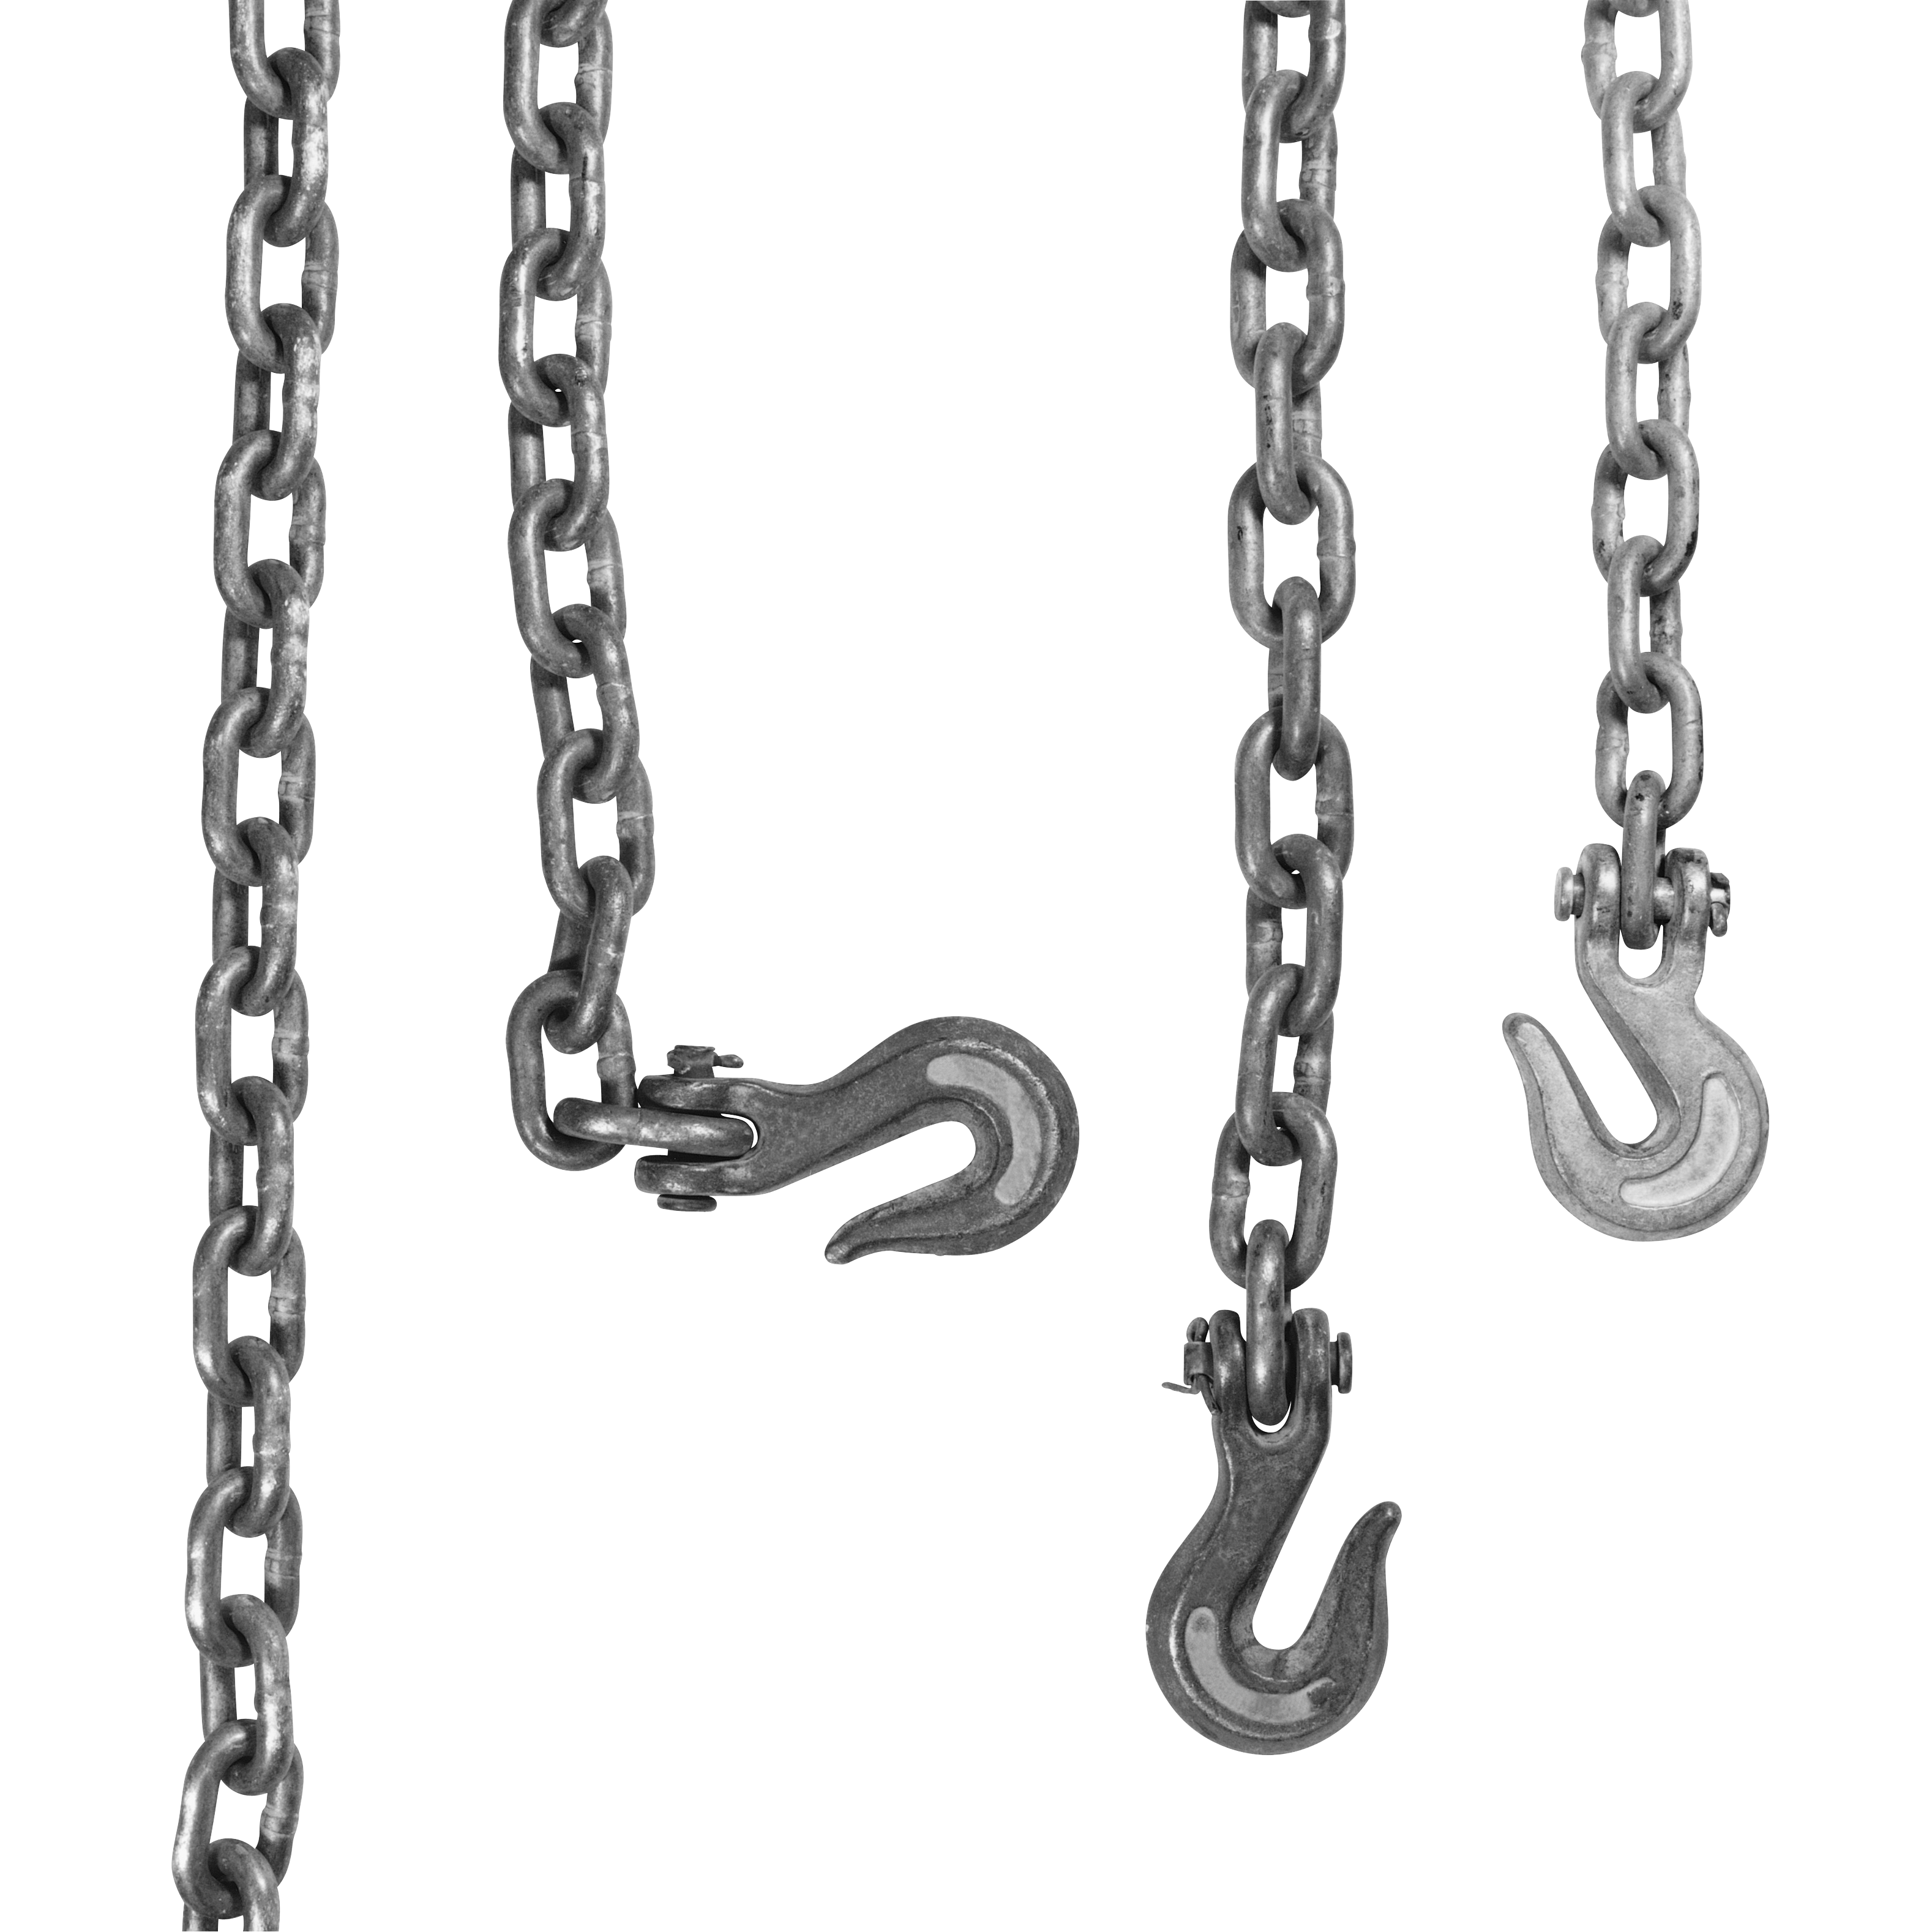 Detail Chains Png Nomer 7